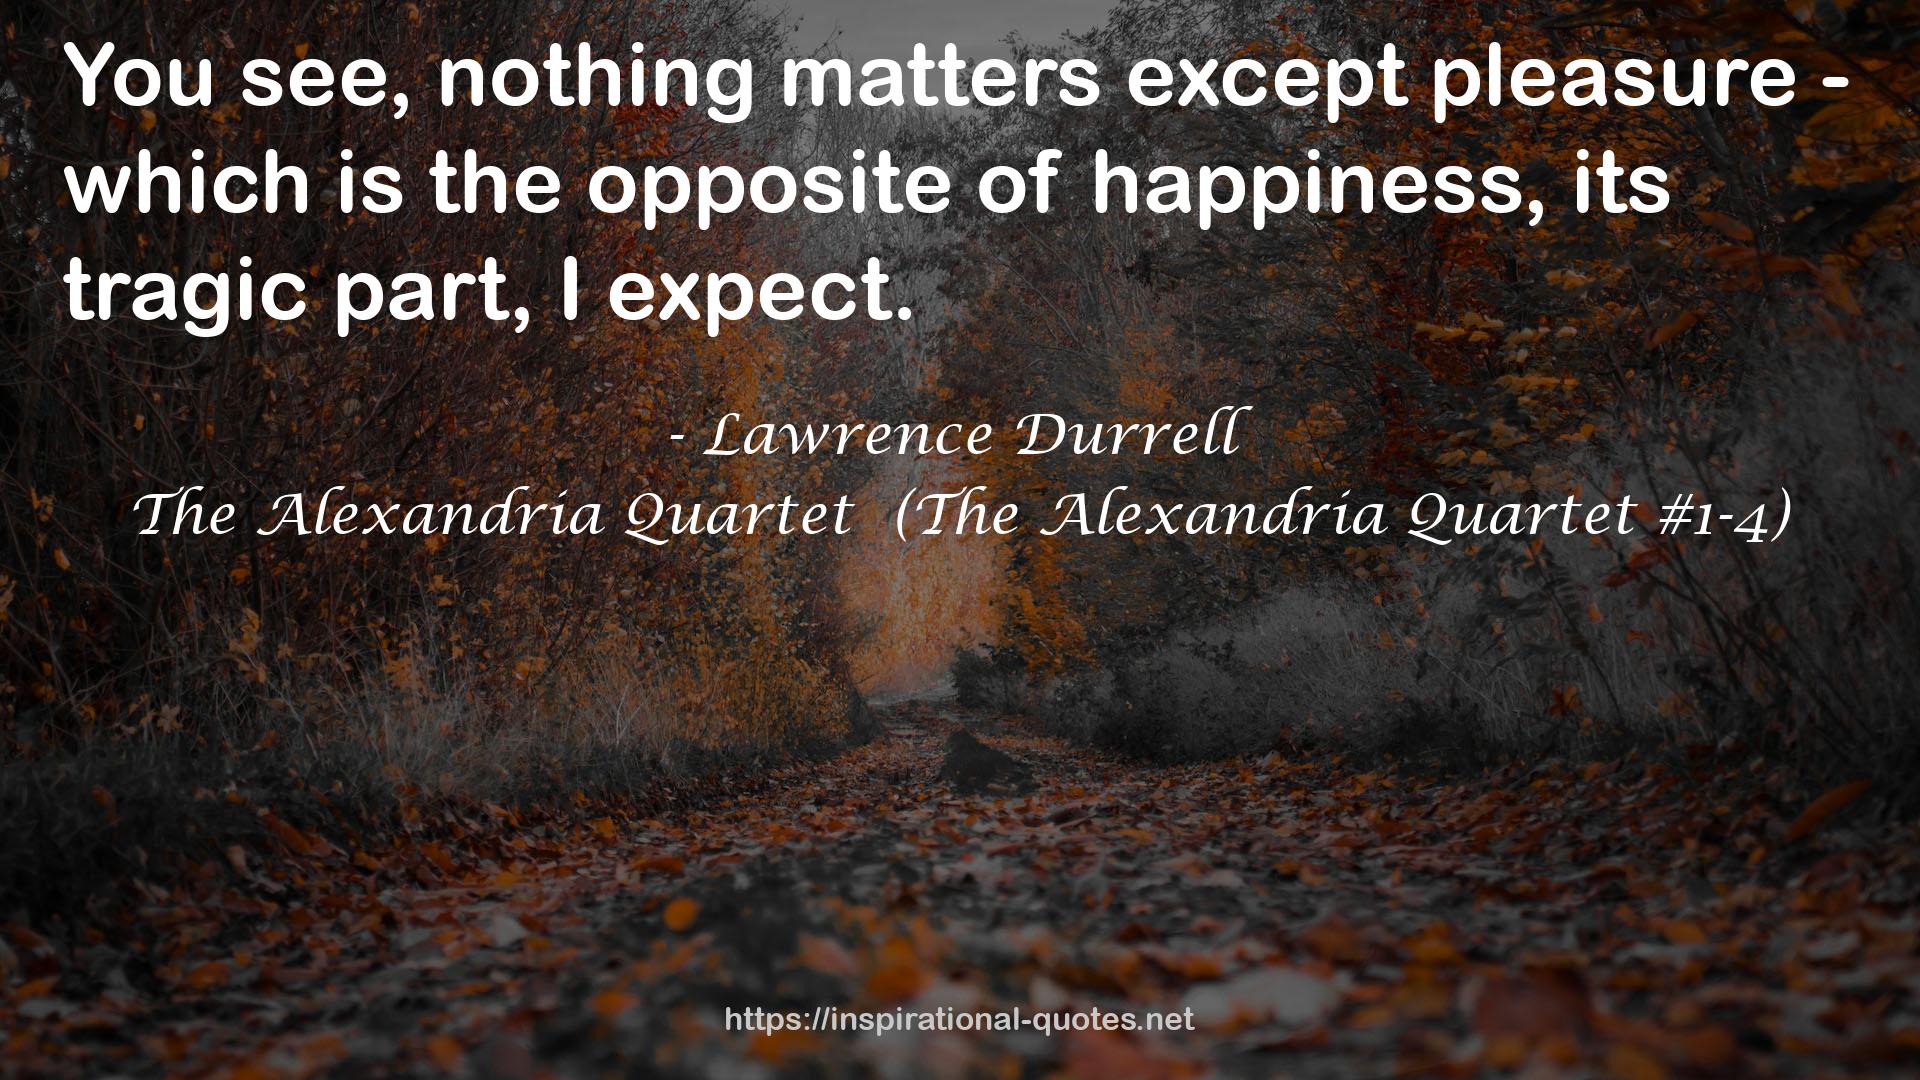 Lawrence Durrell QUOTES